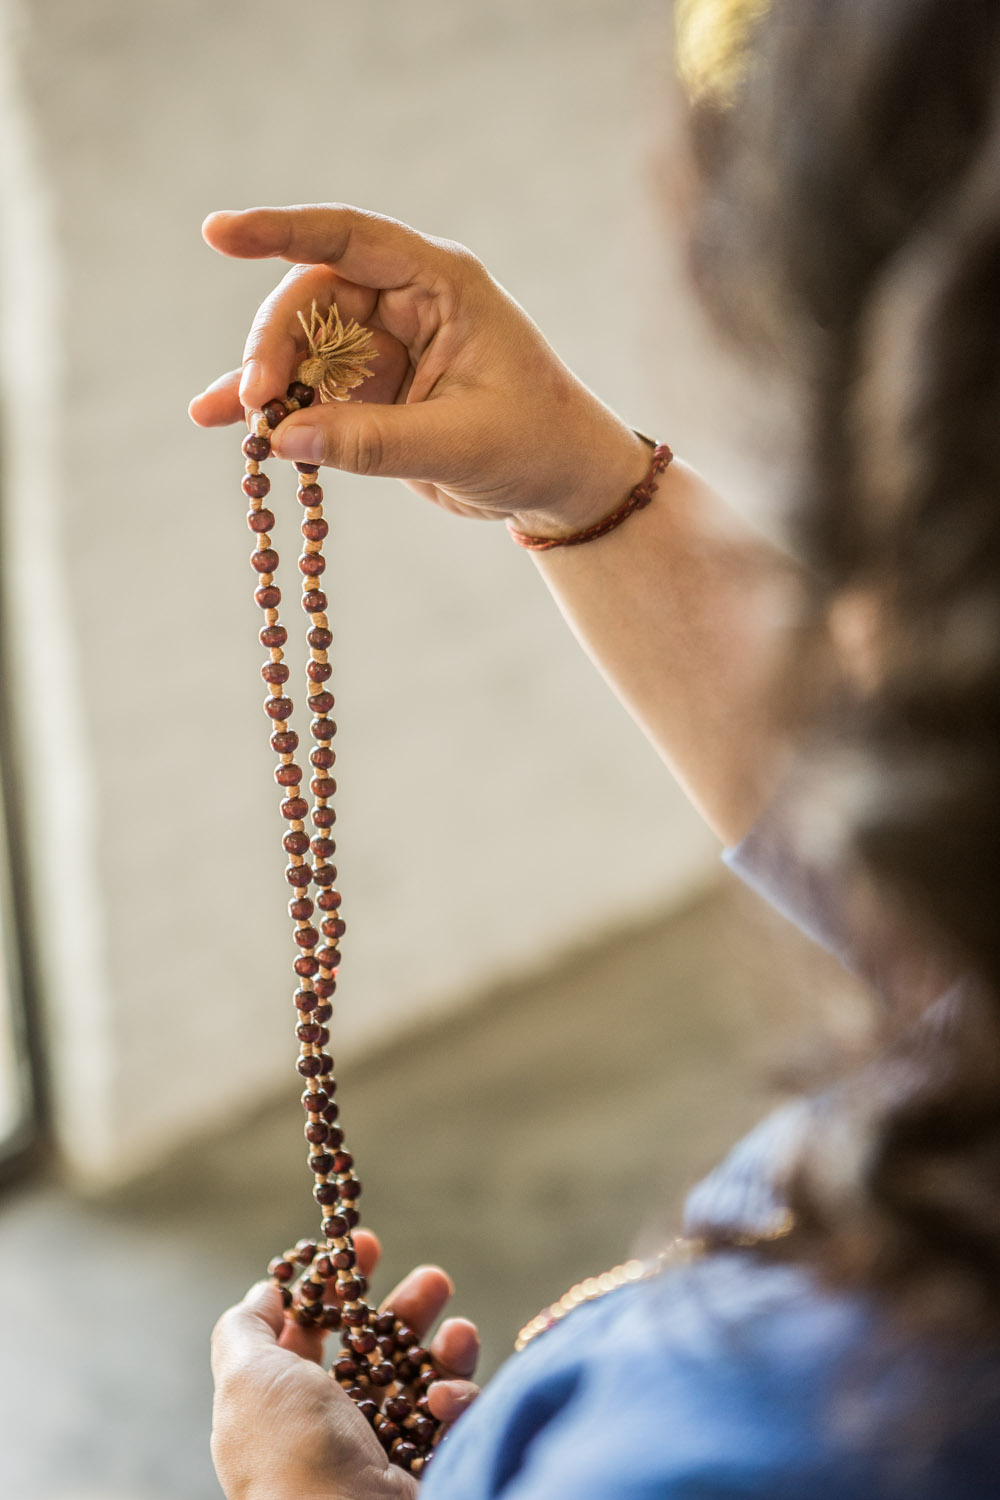 While telling the beads of the japa mala, why is it advised not to touch it  with the index finger? - Quora